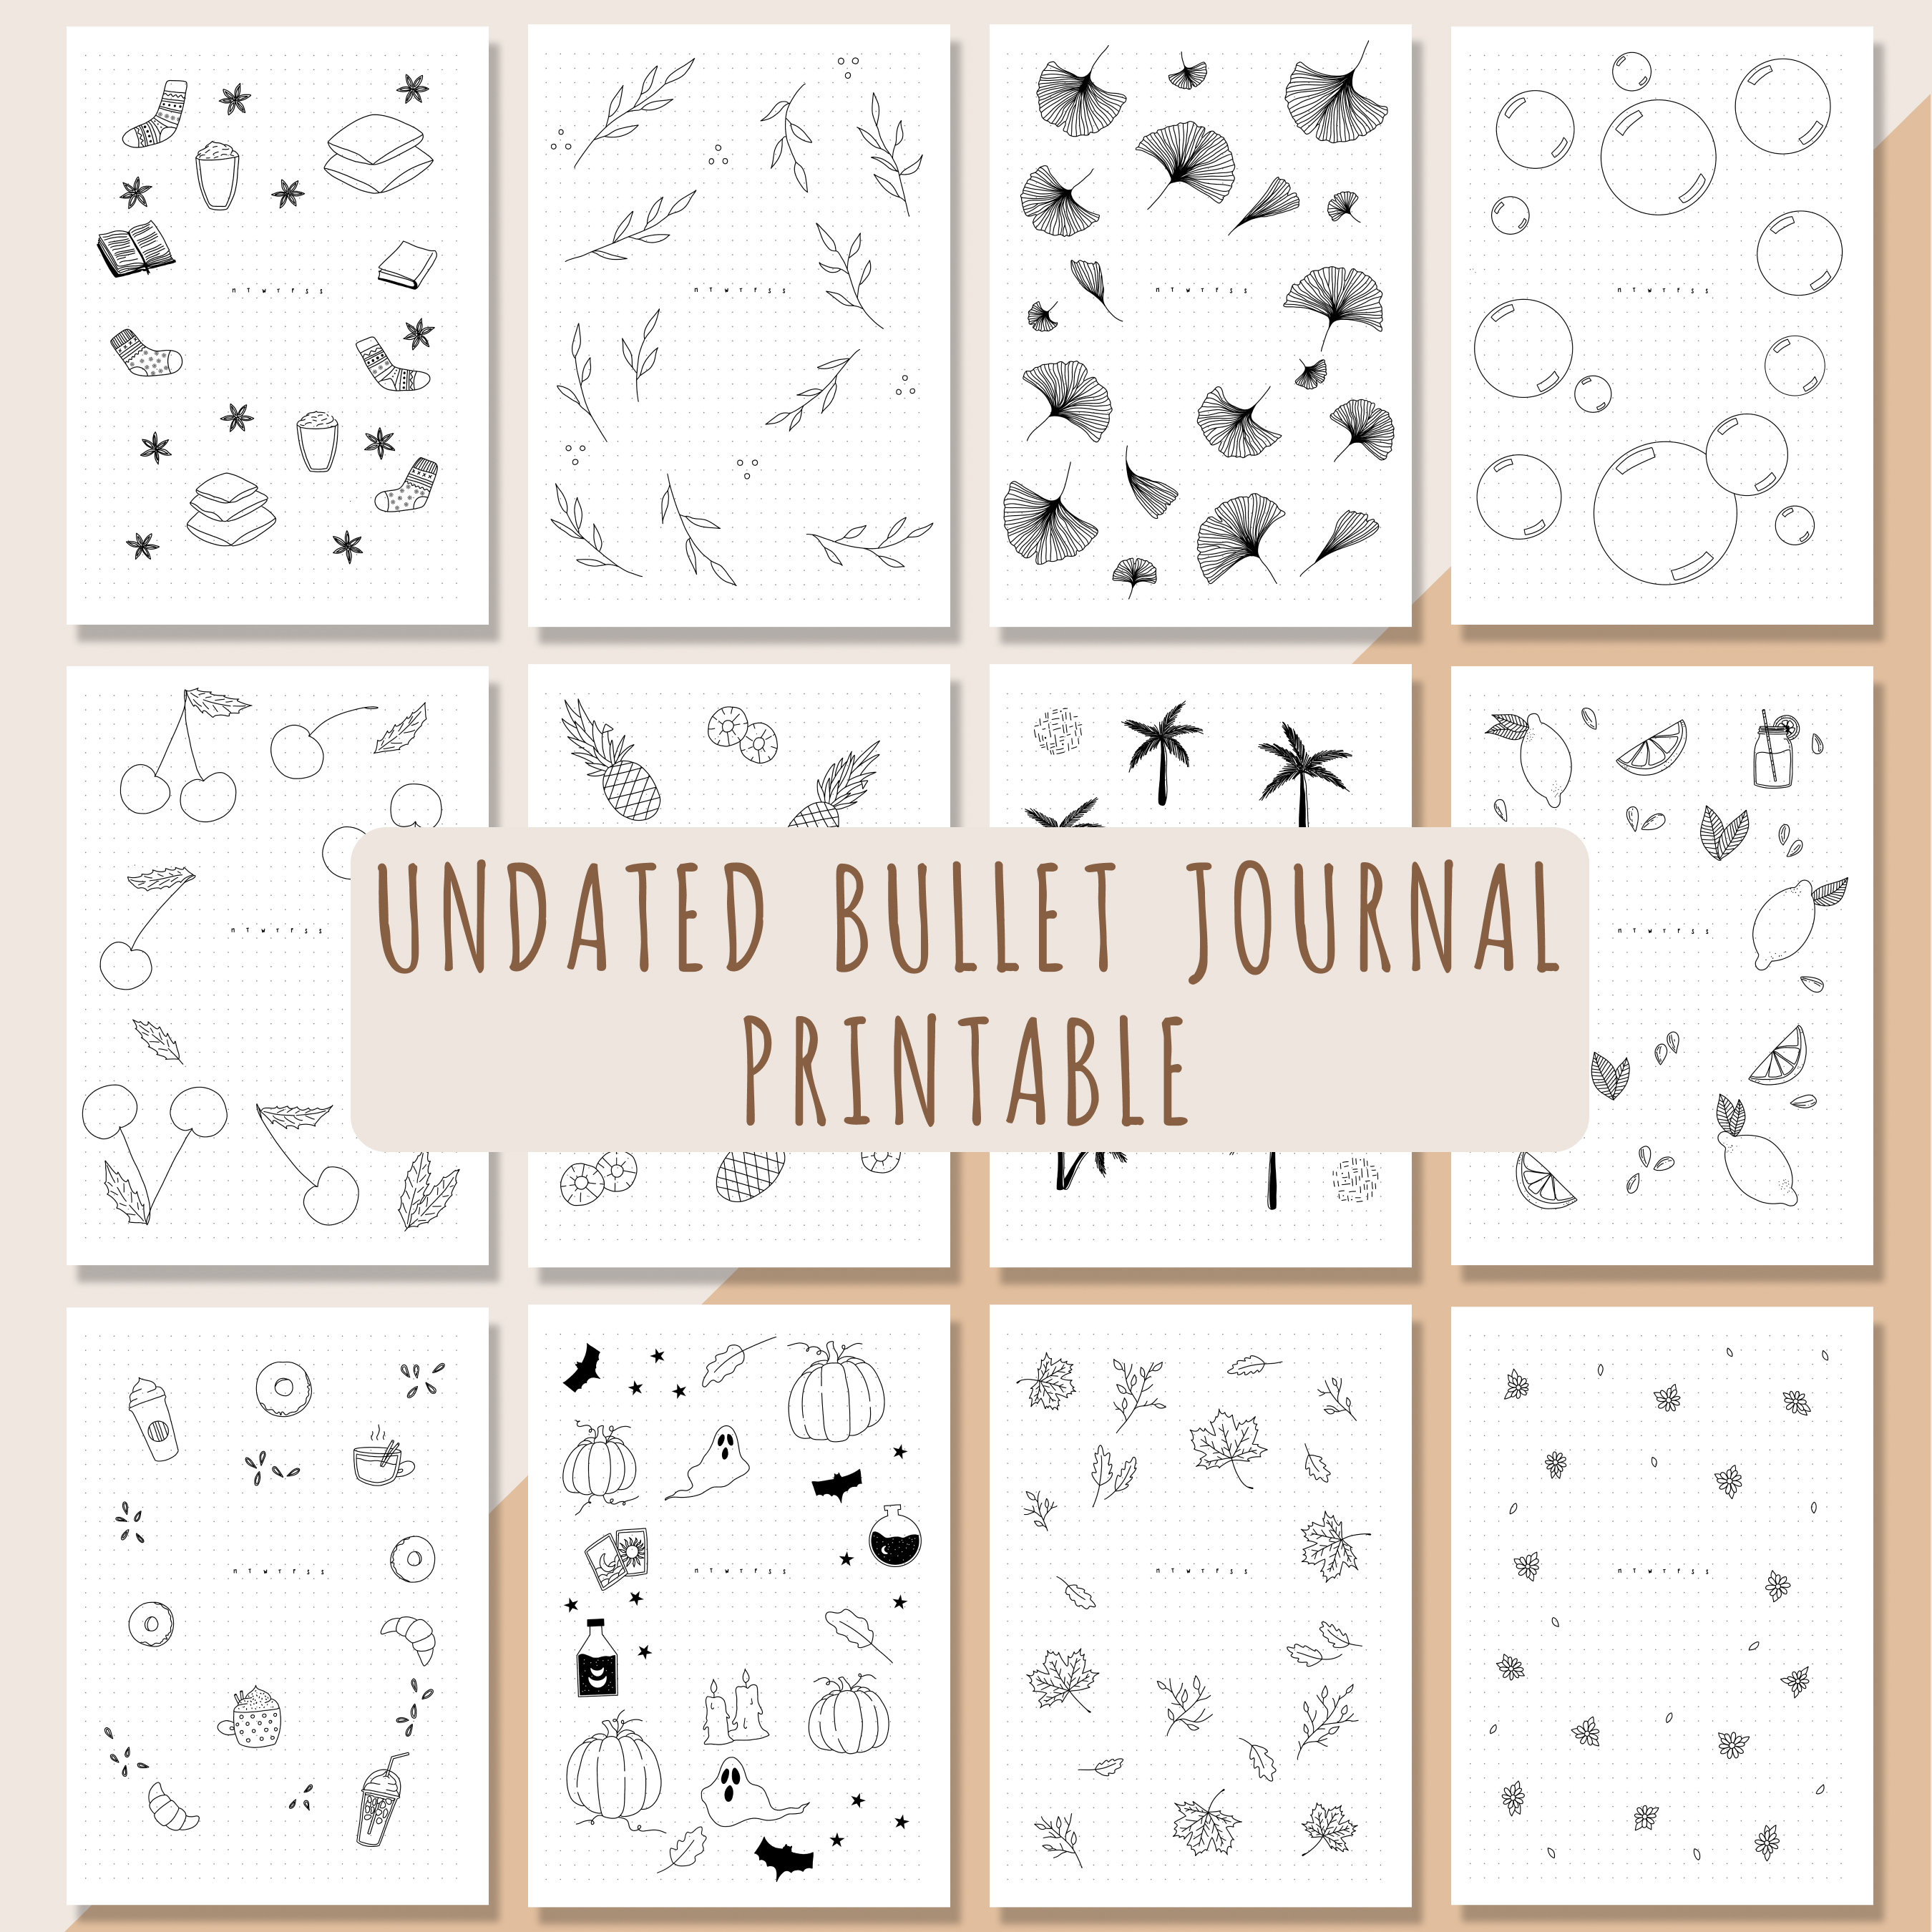 2024 Pre-Made Bullet Dotted Journal Pages; Instant Download